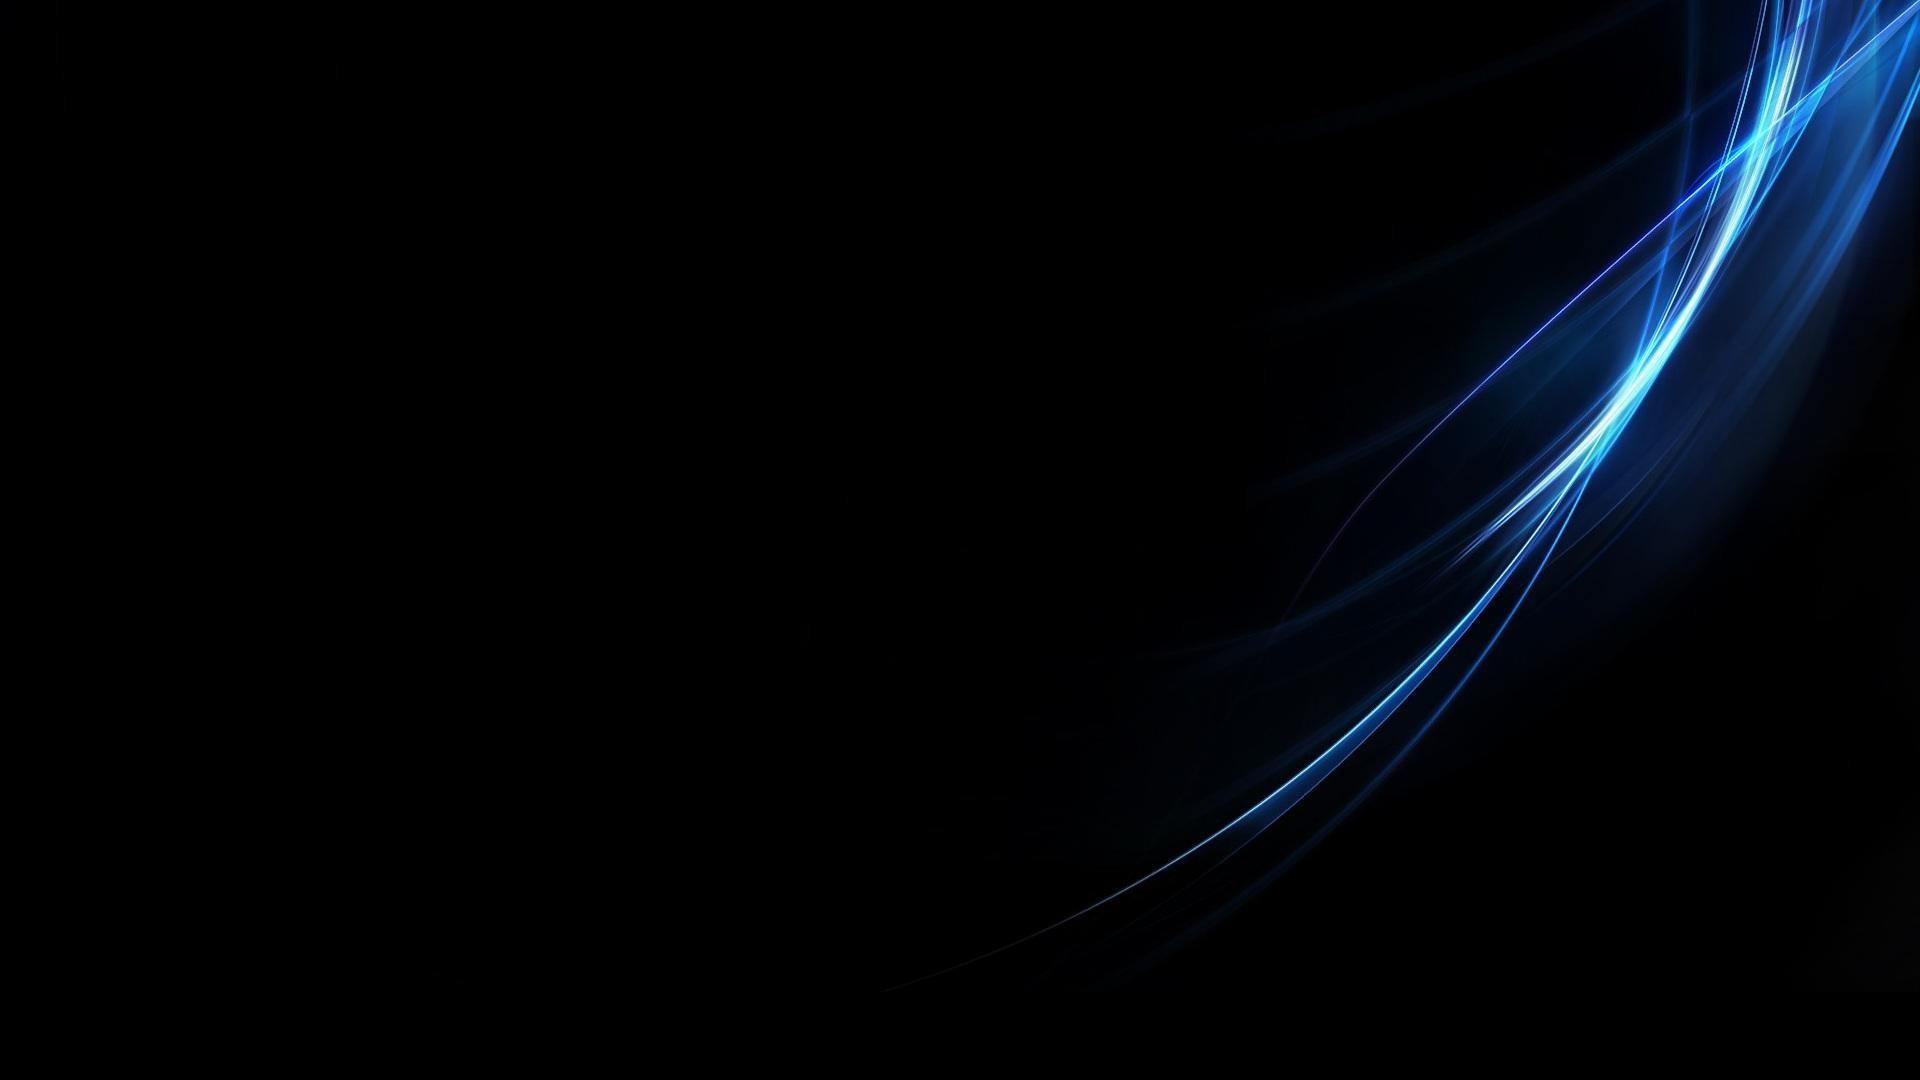 HD Black and Blue Image